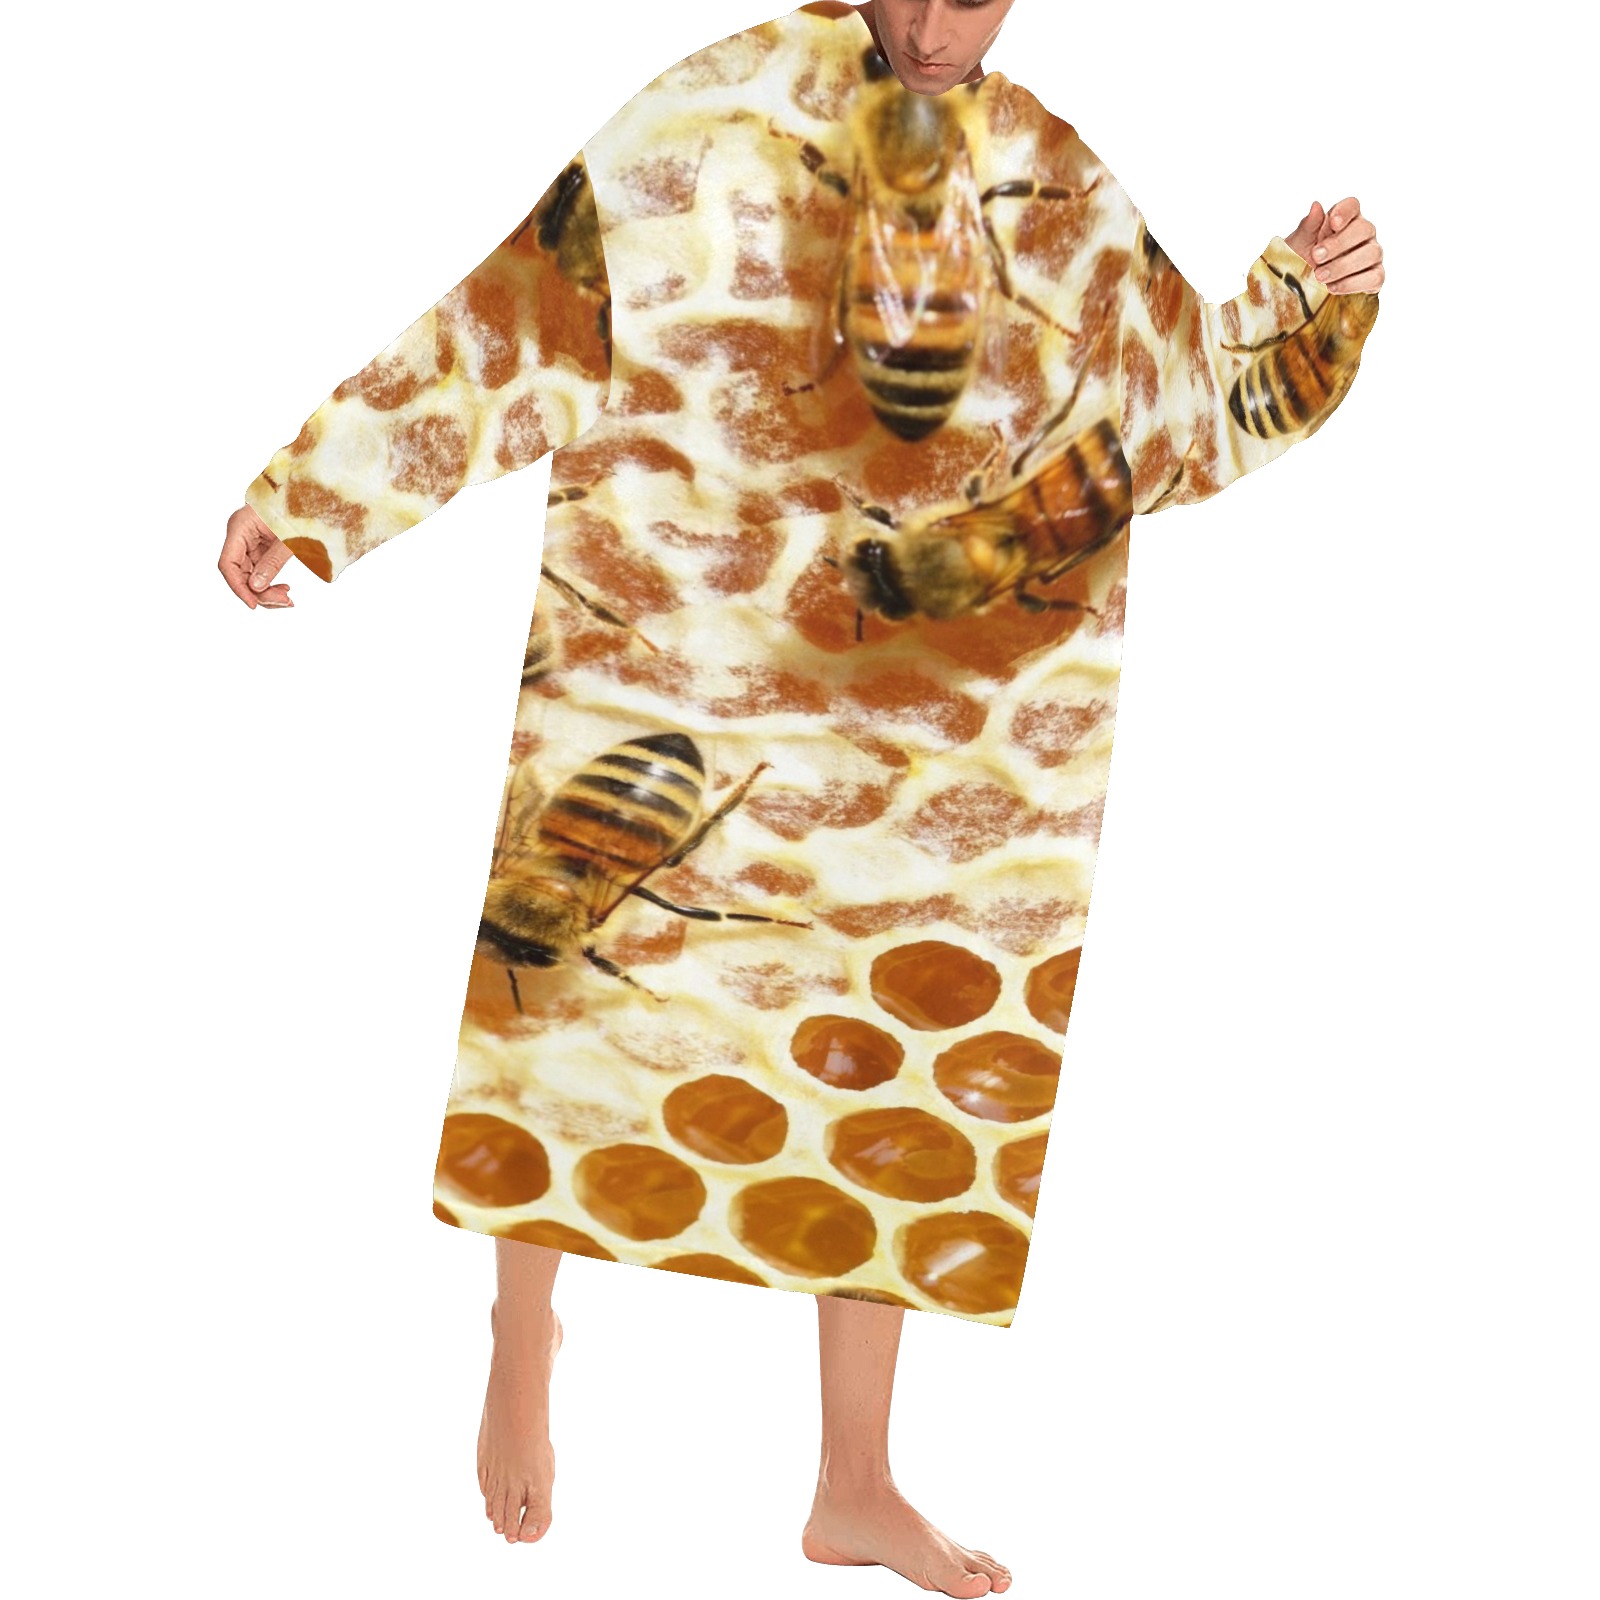 HONEY BEES 2 Blanket Robe with Sleeves for Adults